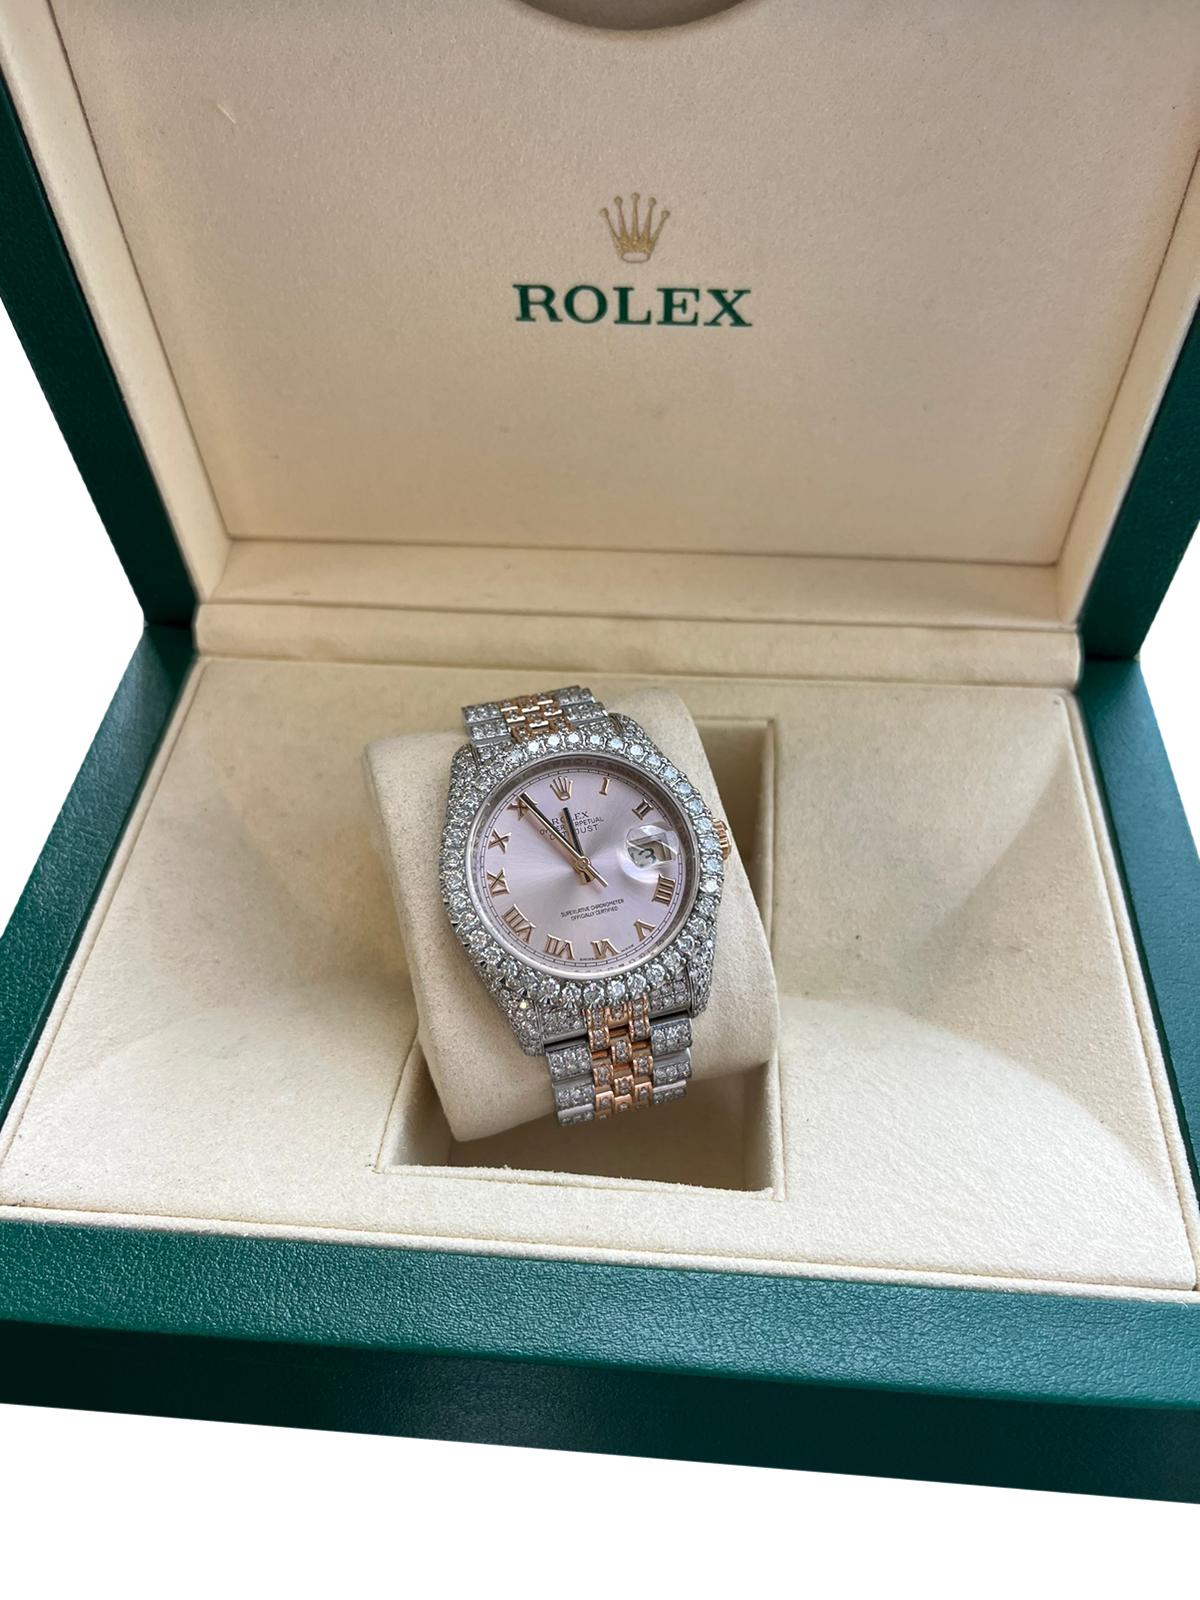 Rolex Datejust 36mm Rose Gold Dial Diamond Bezel Iced Out Jubilee Watch 116233 In Good Condition For Sale In Aventura, FL